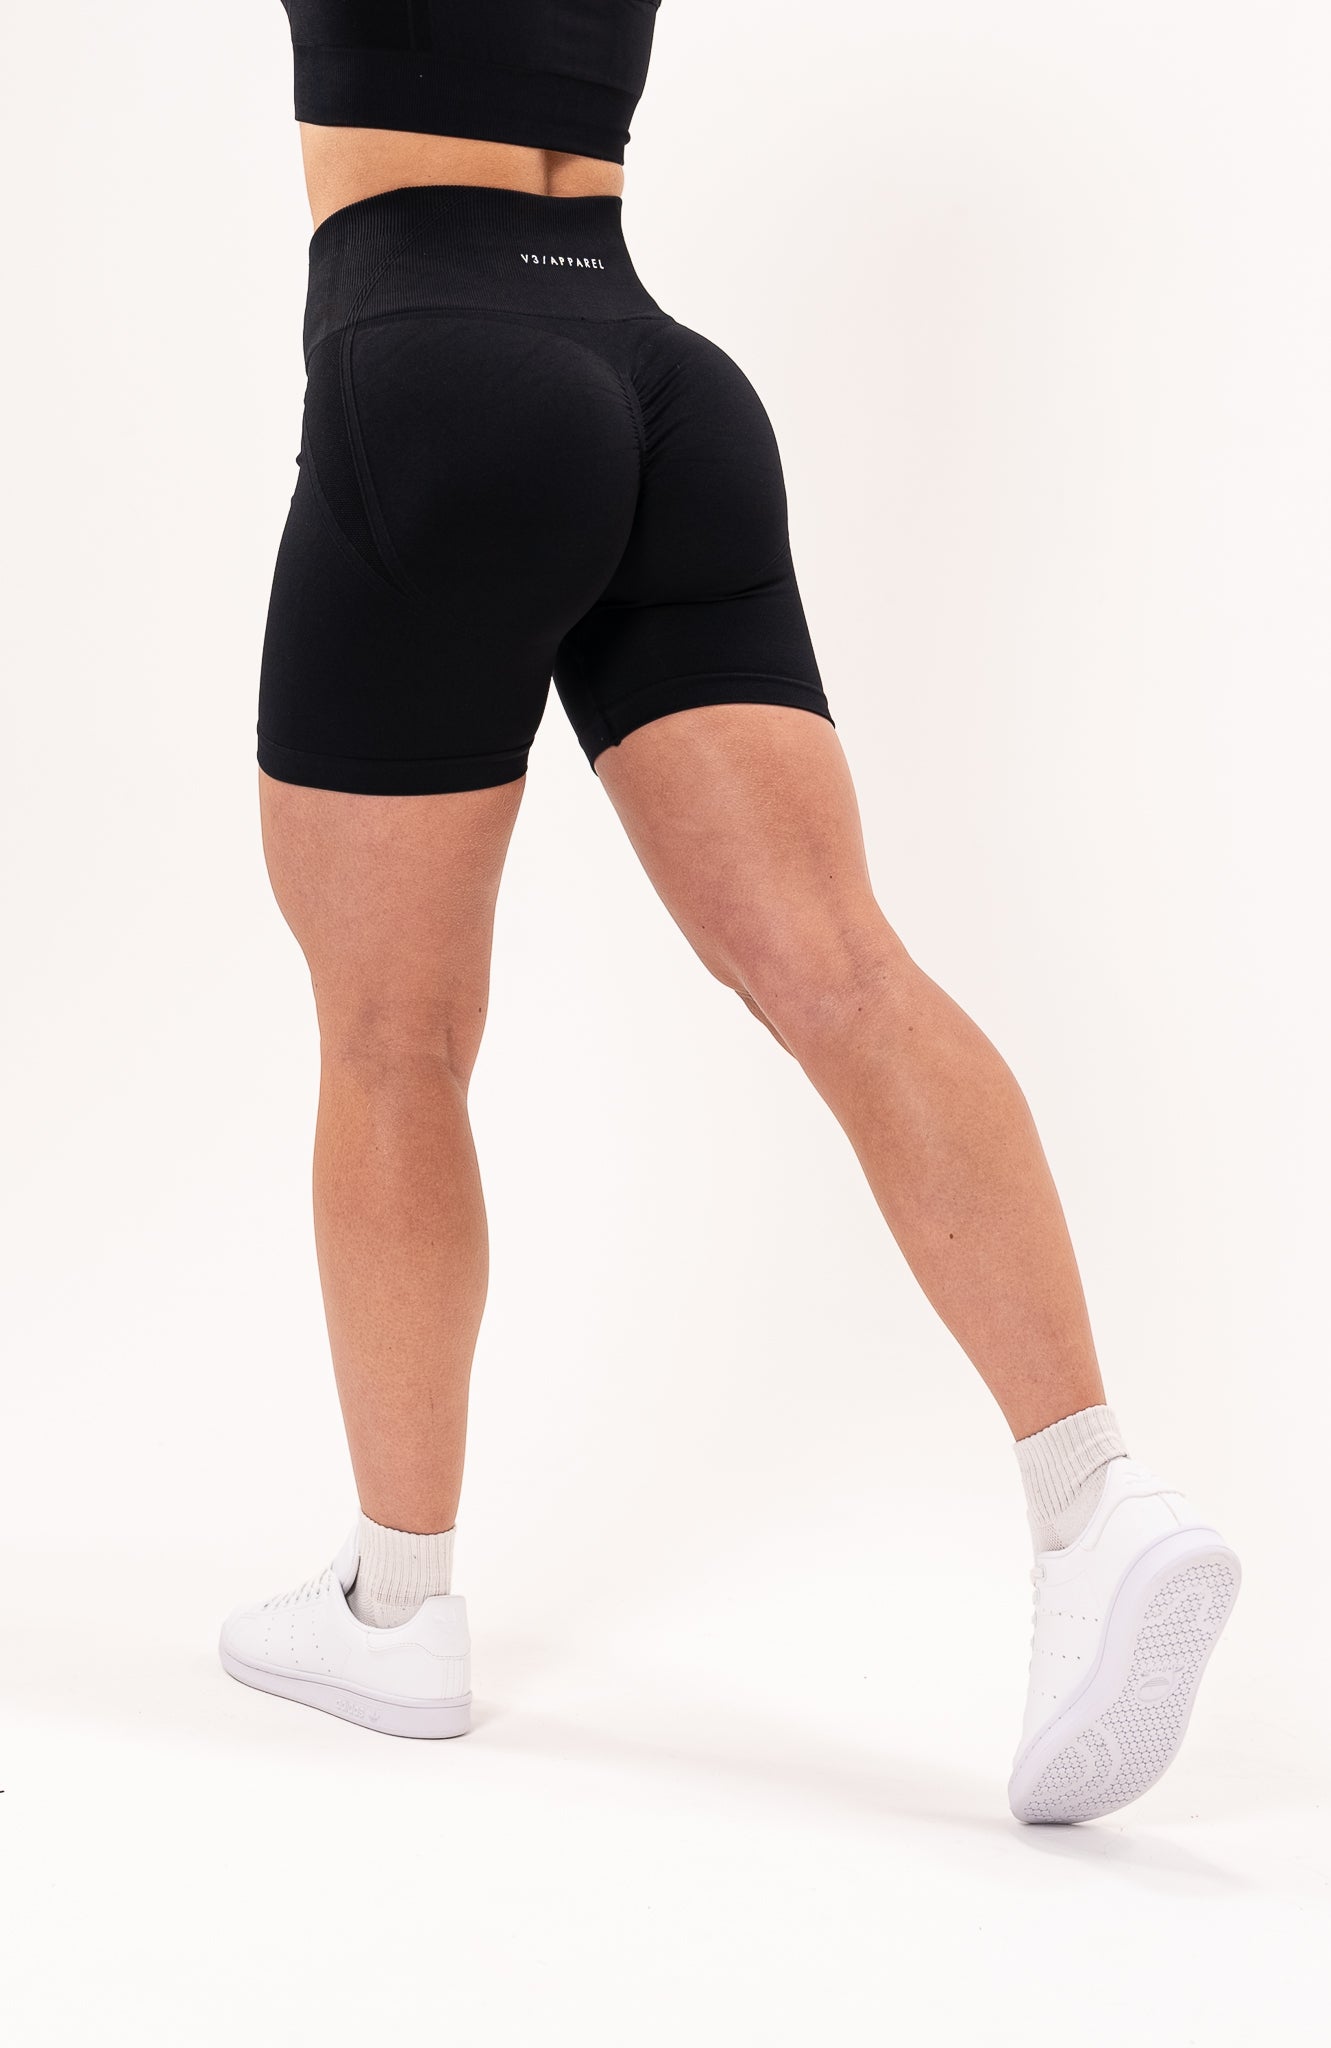 Buy Scrunch Butt Lifting Shorts for Women Workout Gym Smile